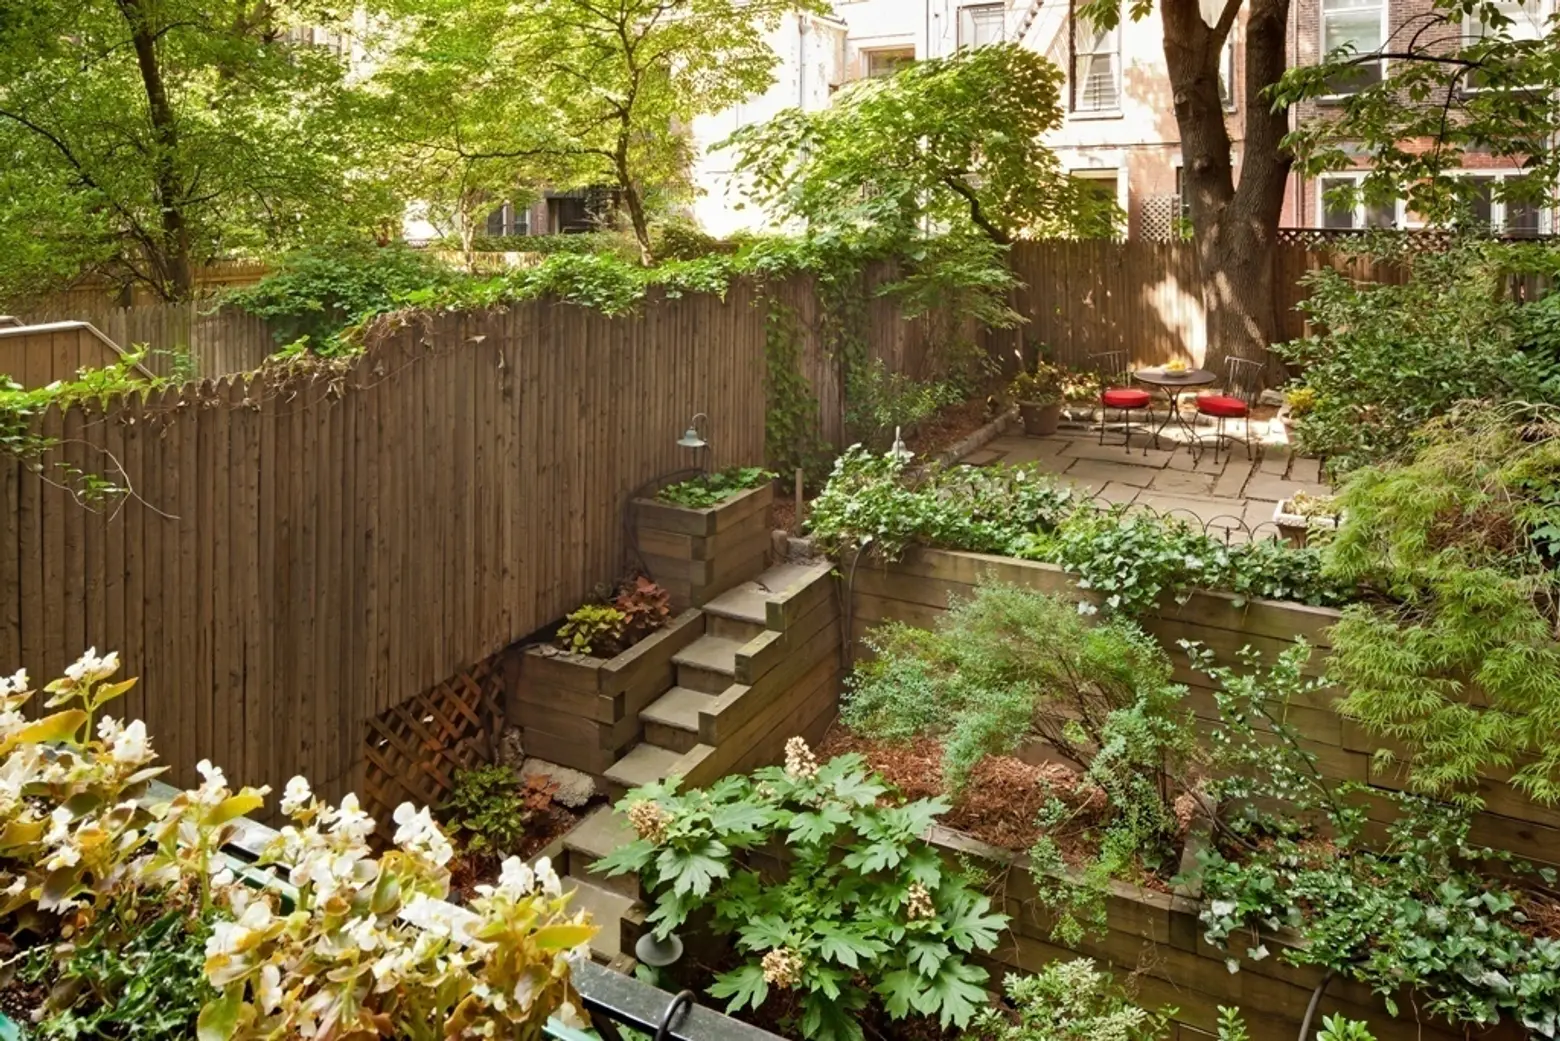 51 West 82nd Street, build-your-own-dream-home, triplex with private garden, Central Park